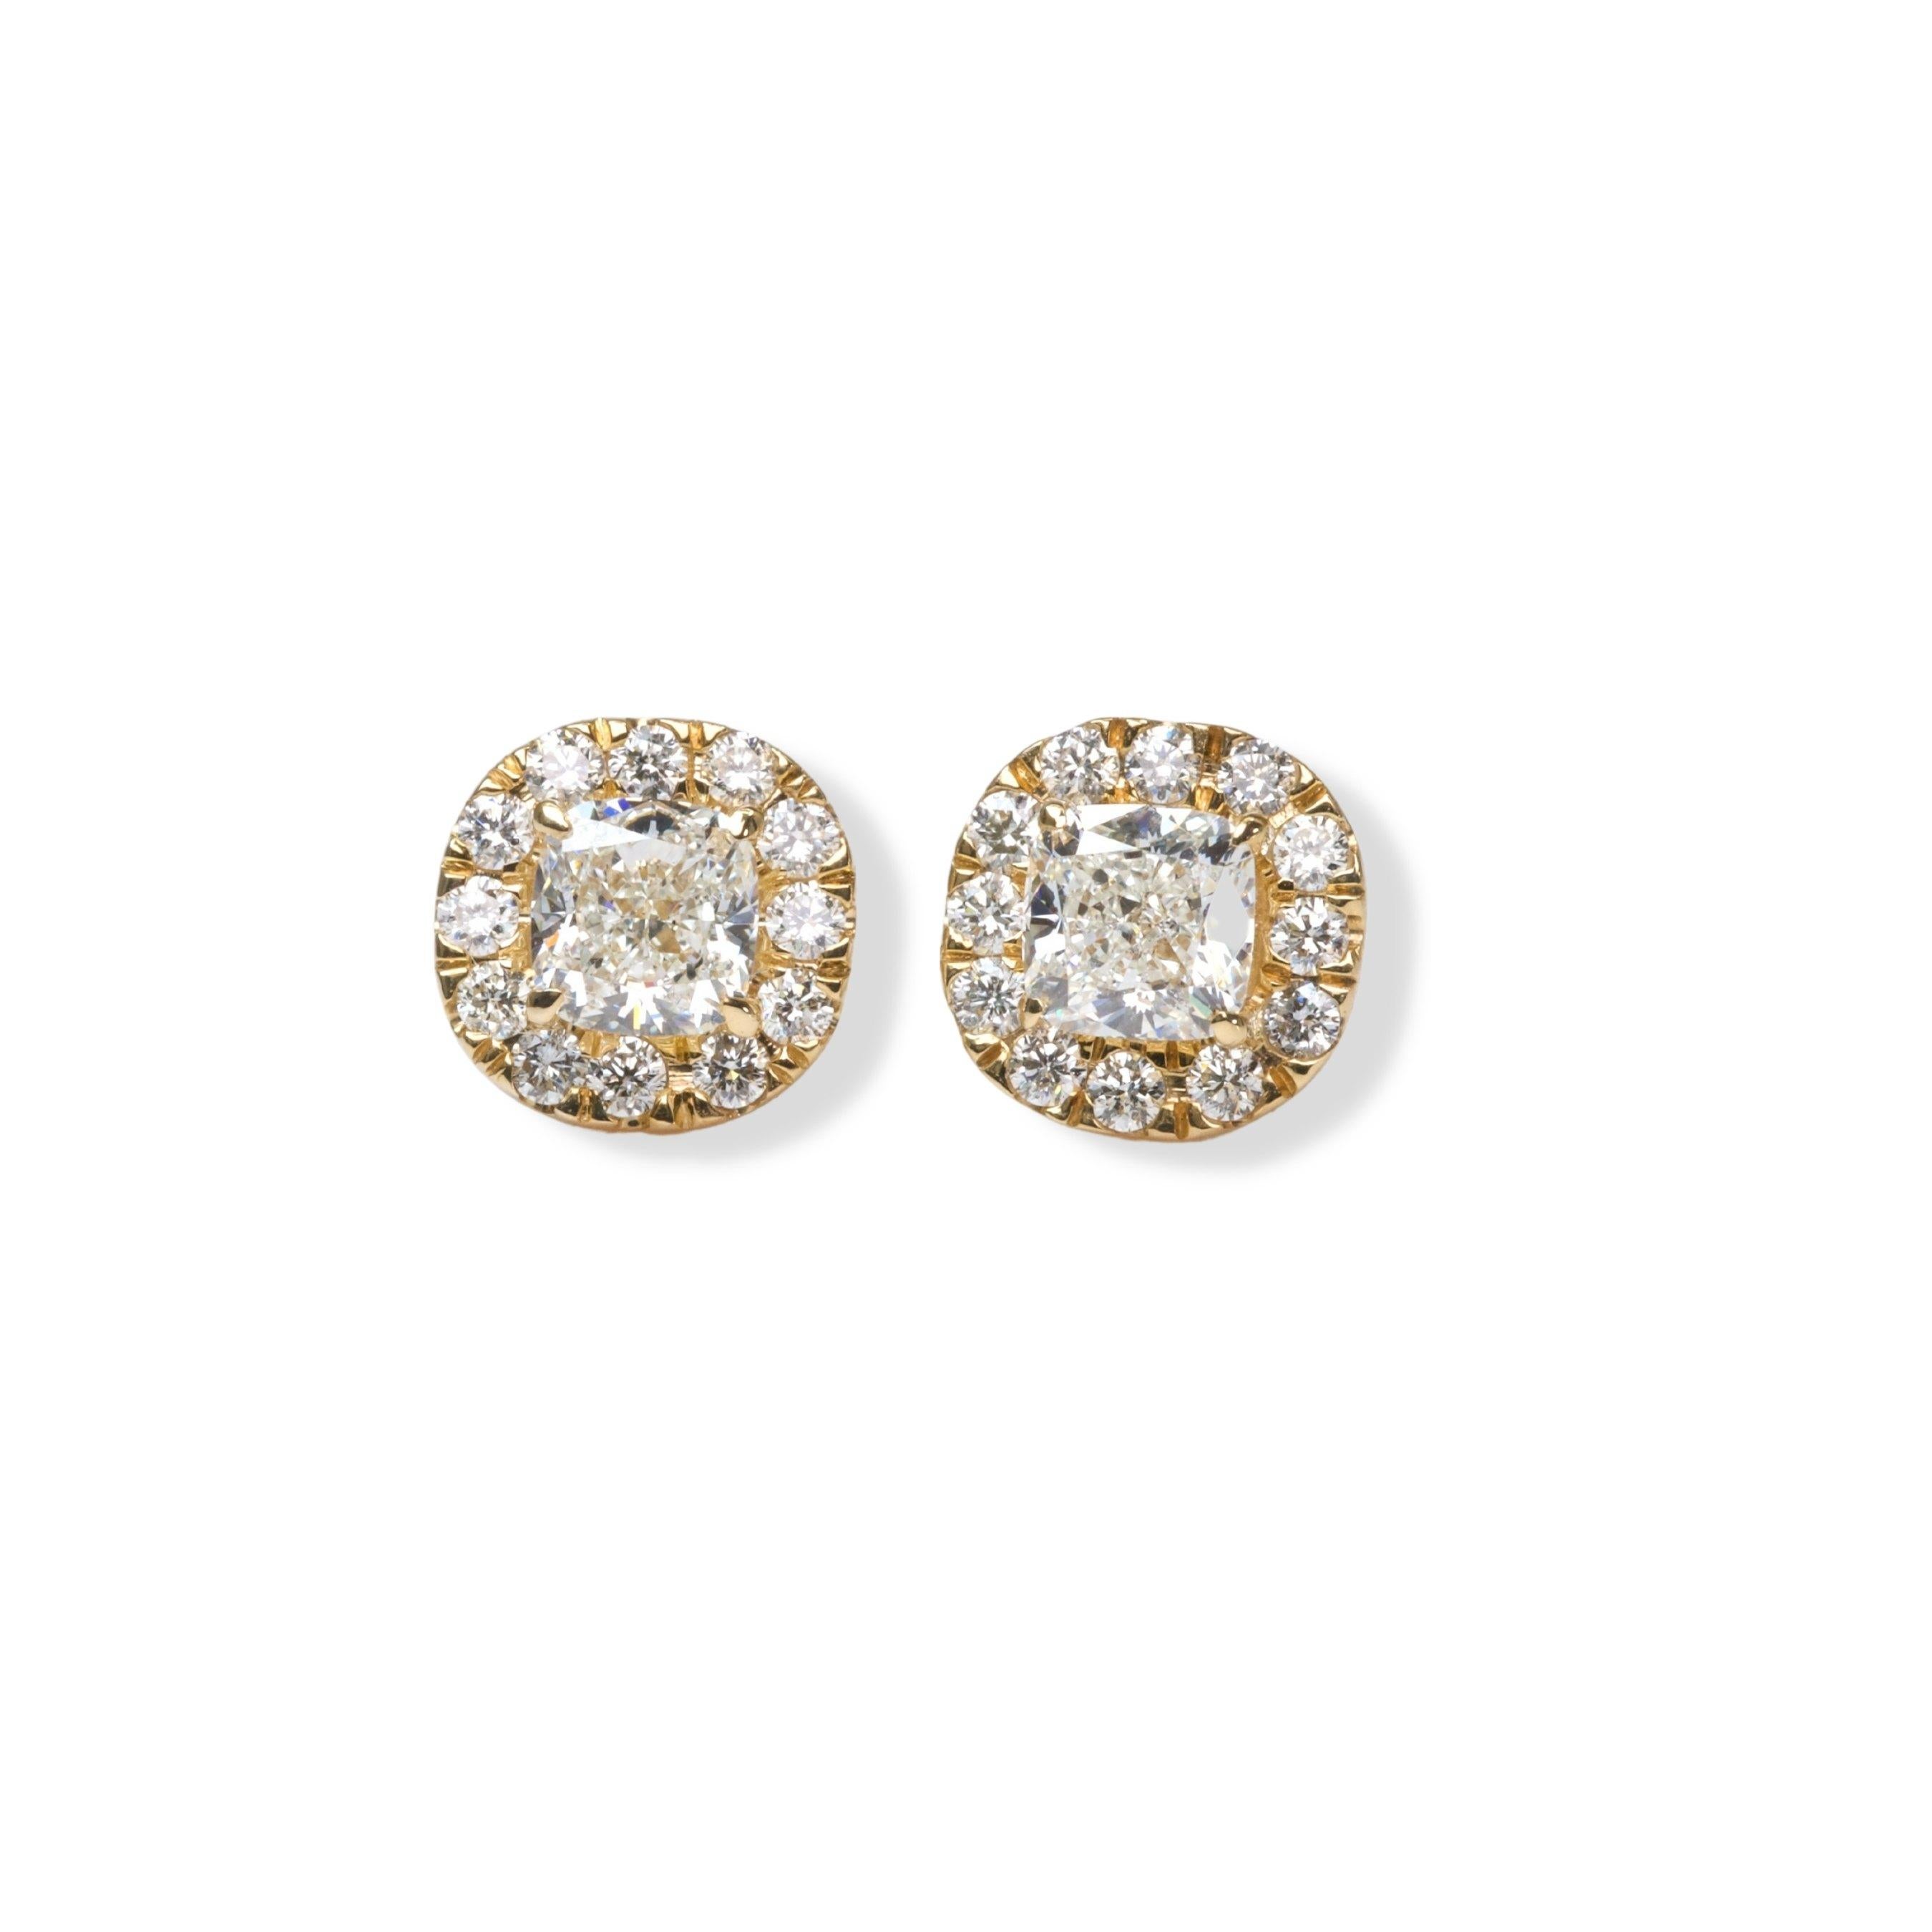 Sparkling 18k Yellow Gold Stud Halo Earrings with 1.40 Diamonds, GIA certificate For Sale 1